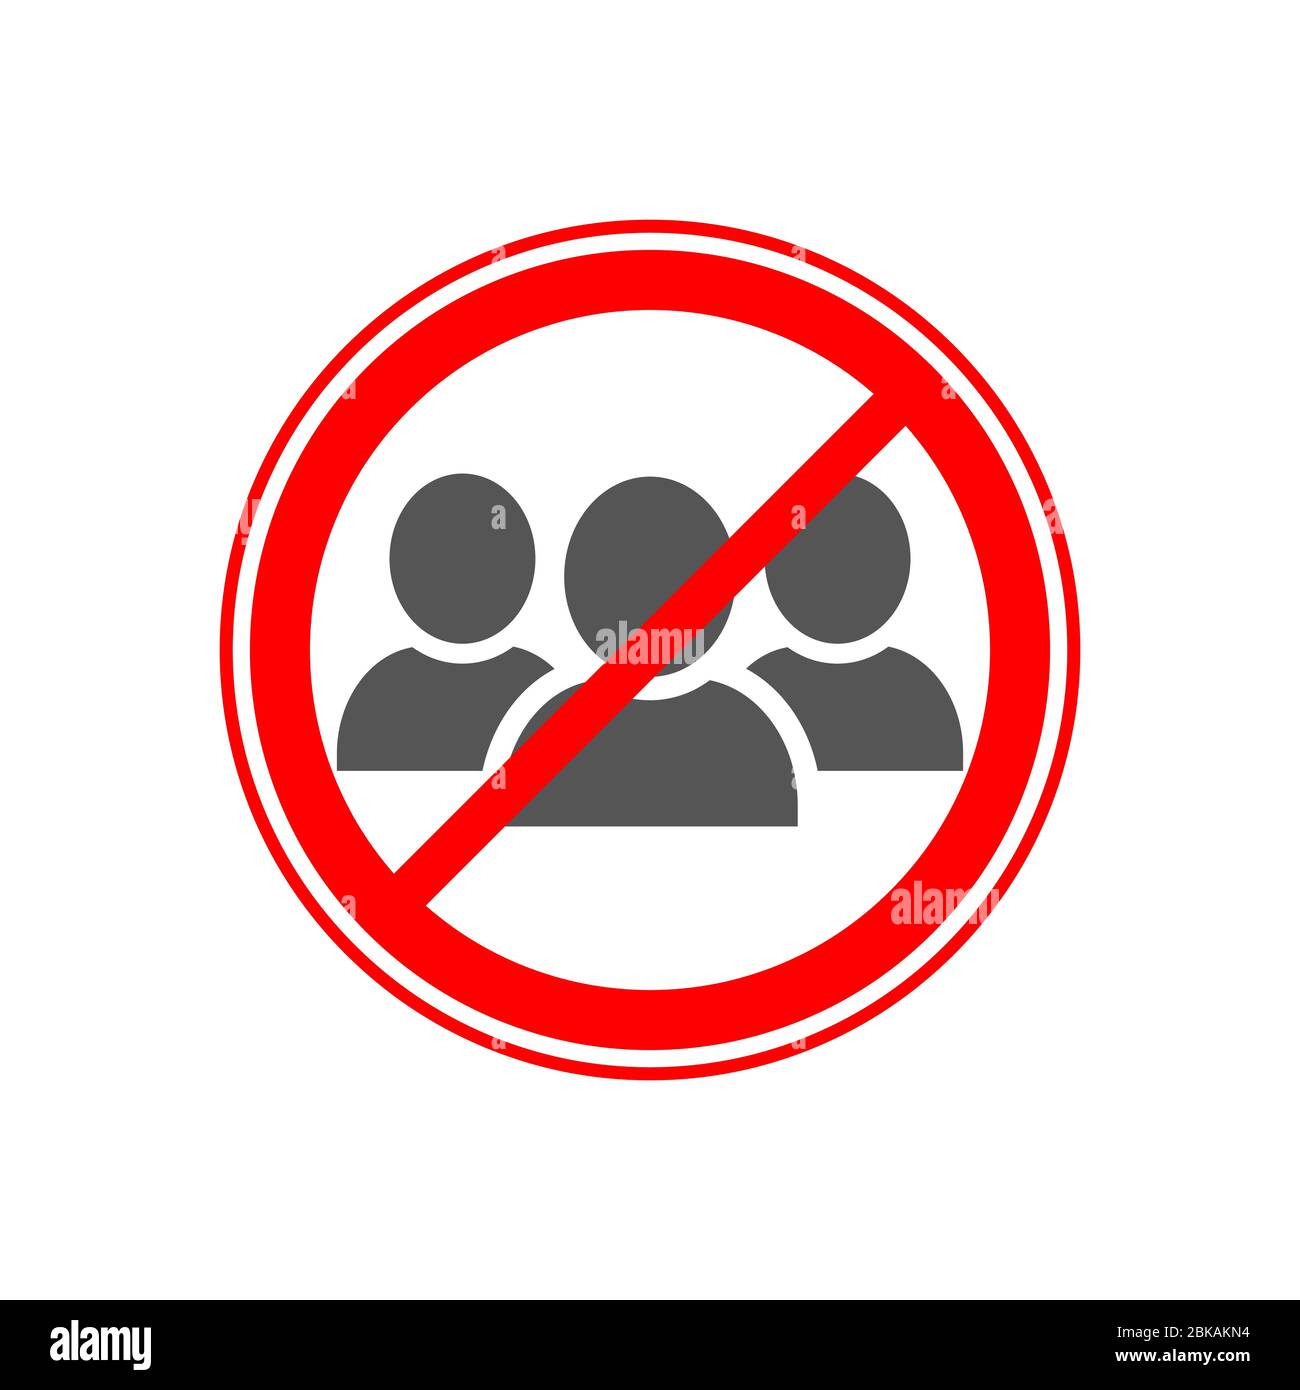 Social distancing avoid crowds icon. No crowd sign. Vector illustration. EPS 10 Stock Vector